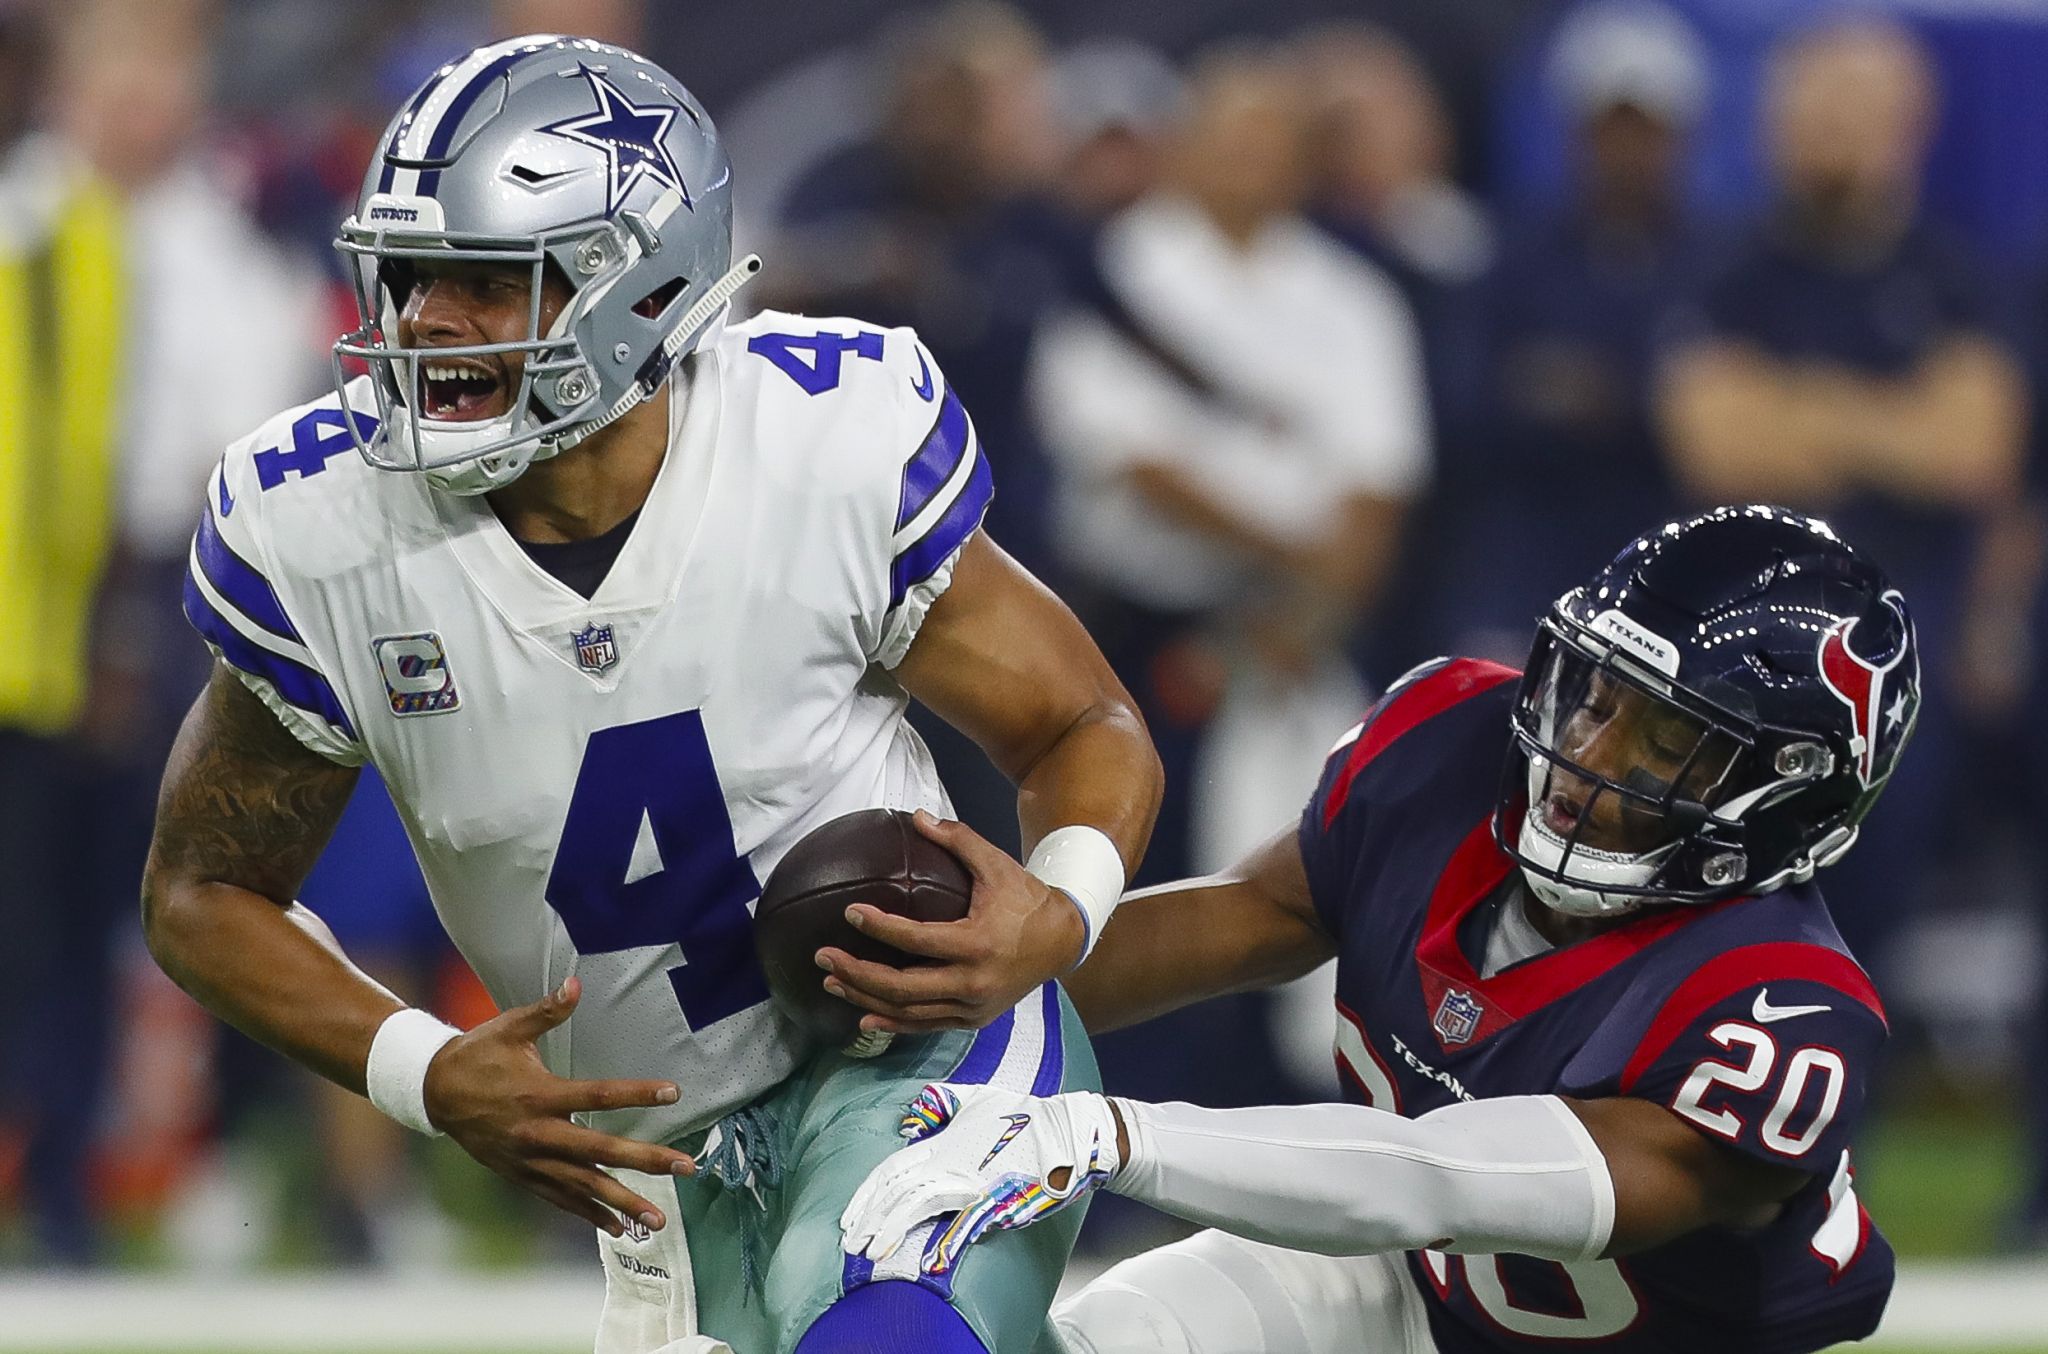 Who is closer to Super Bowl: Texans or Cowboys?